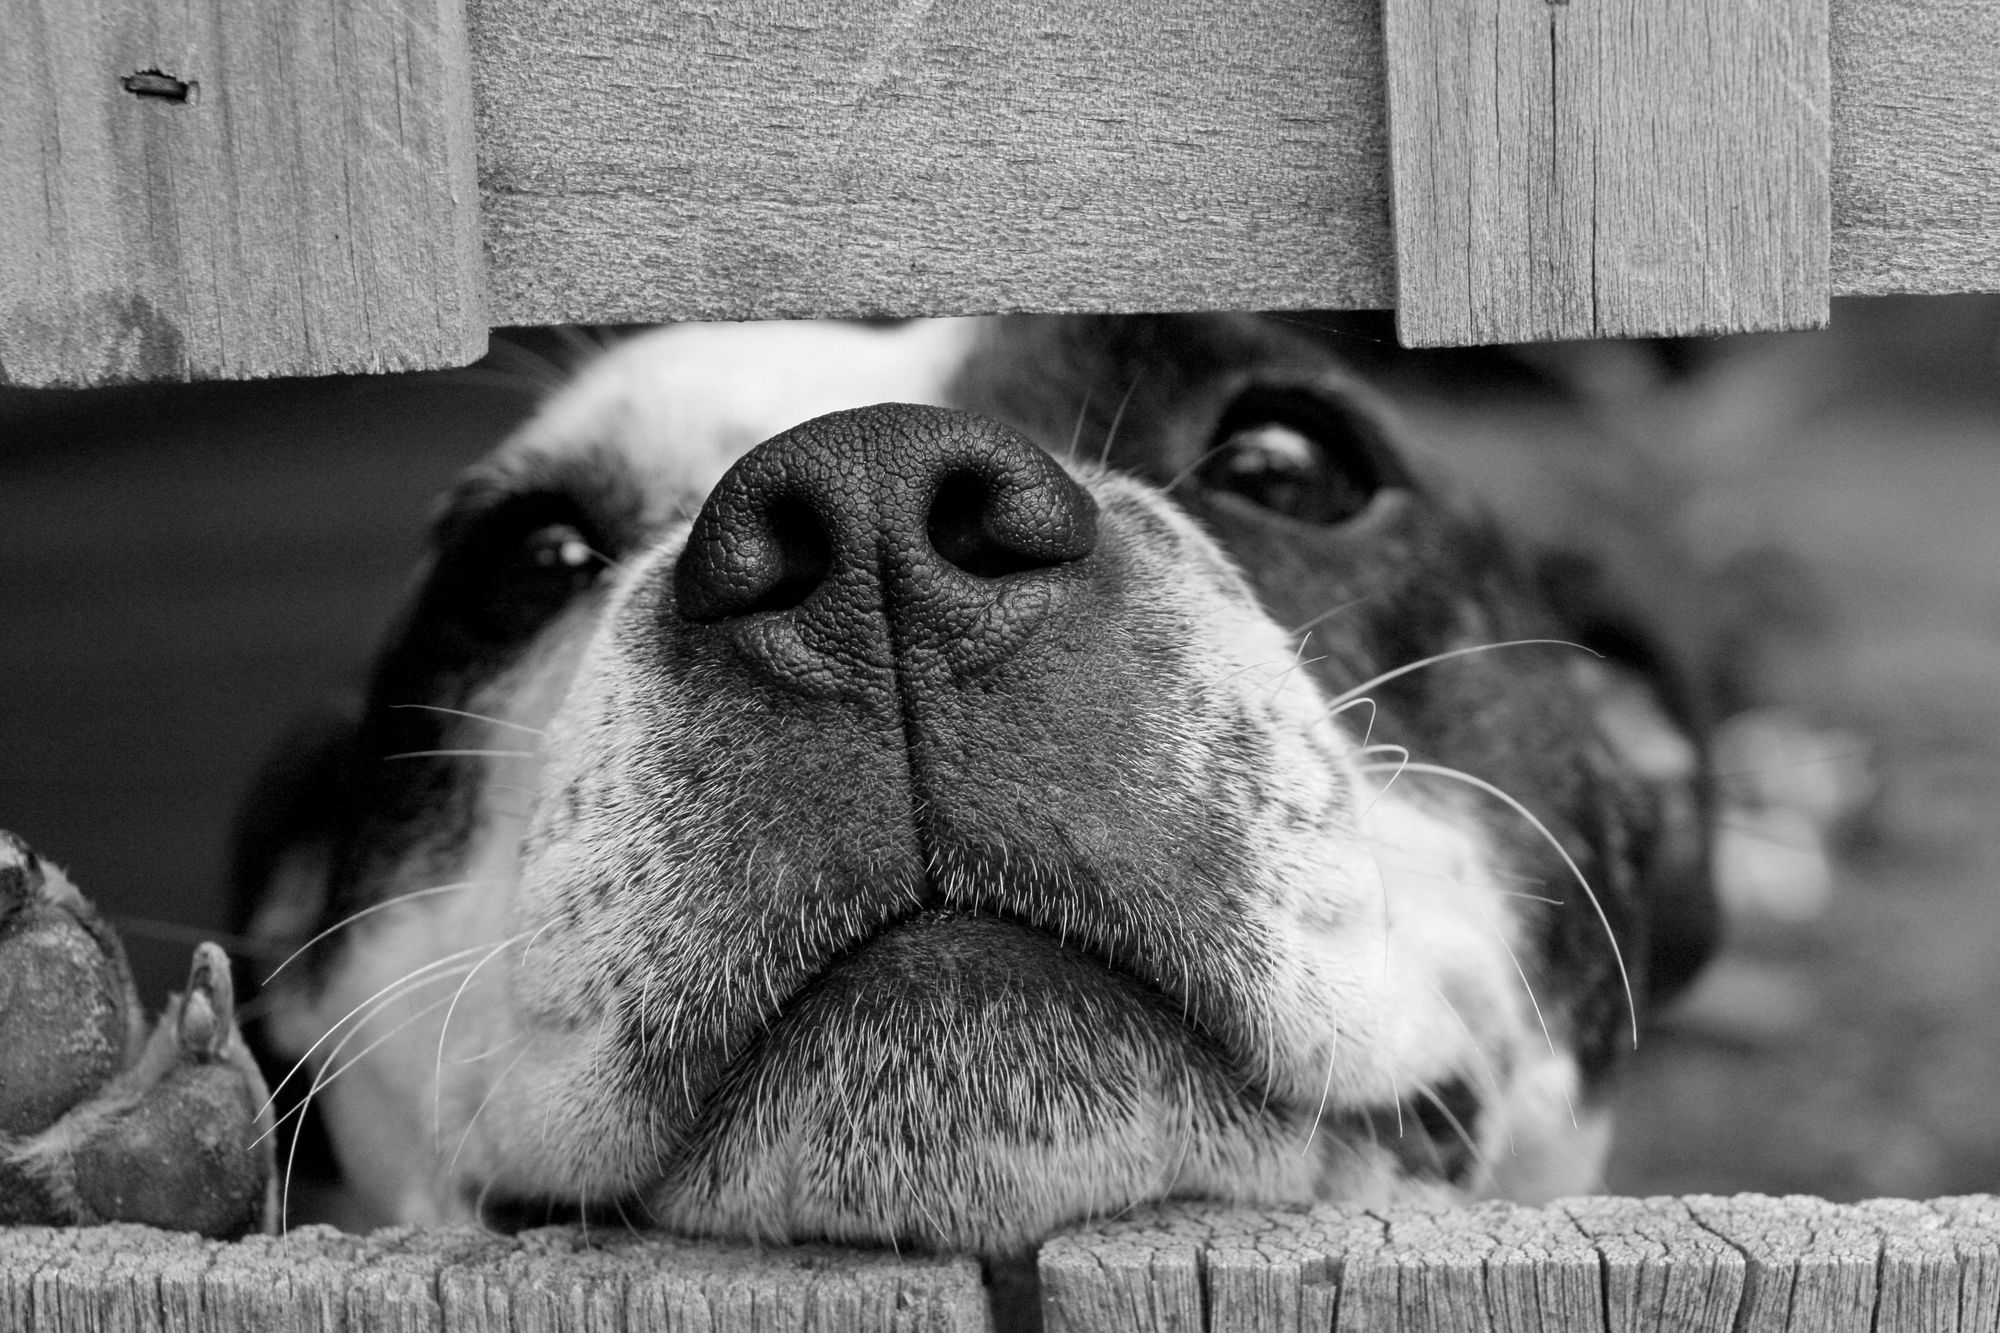 Pup peaking through a fence